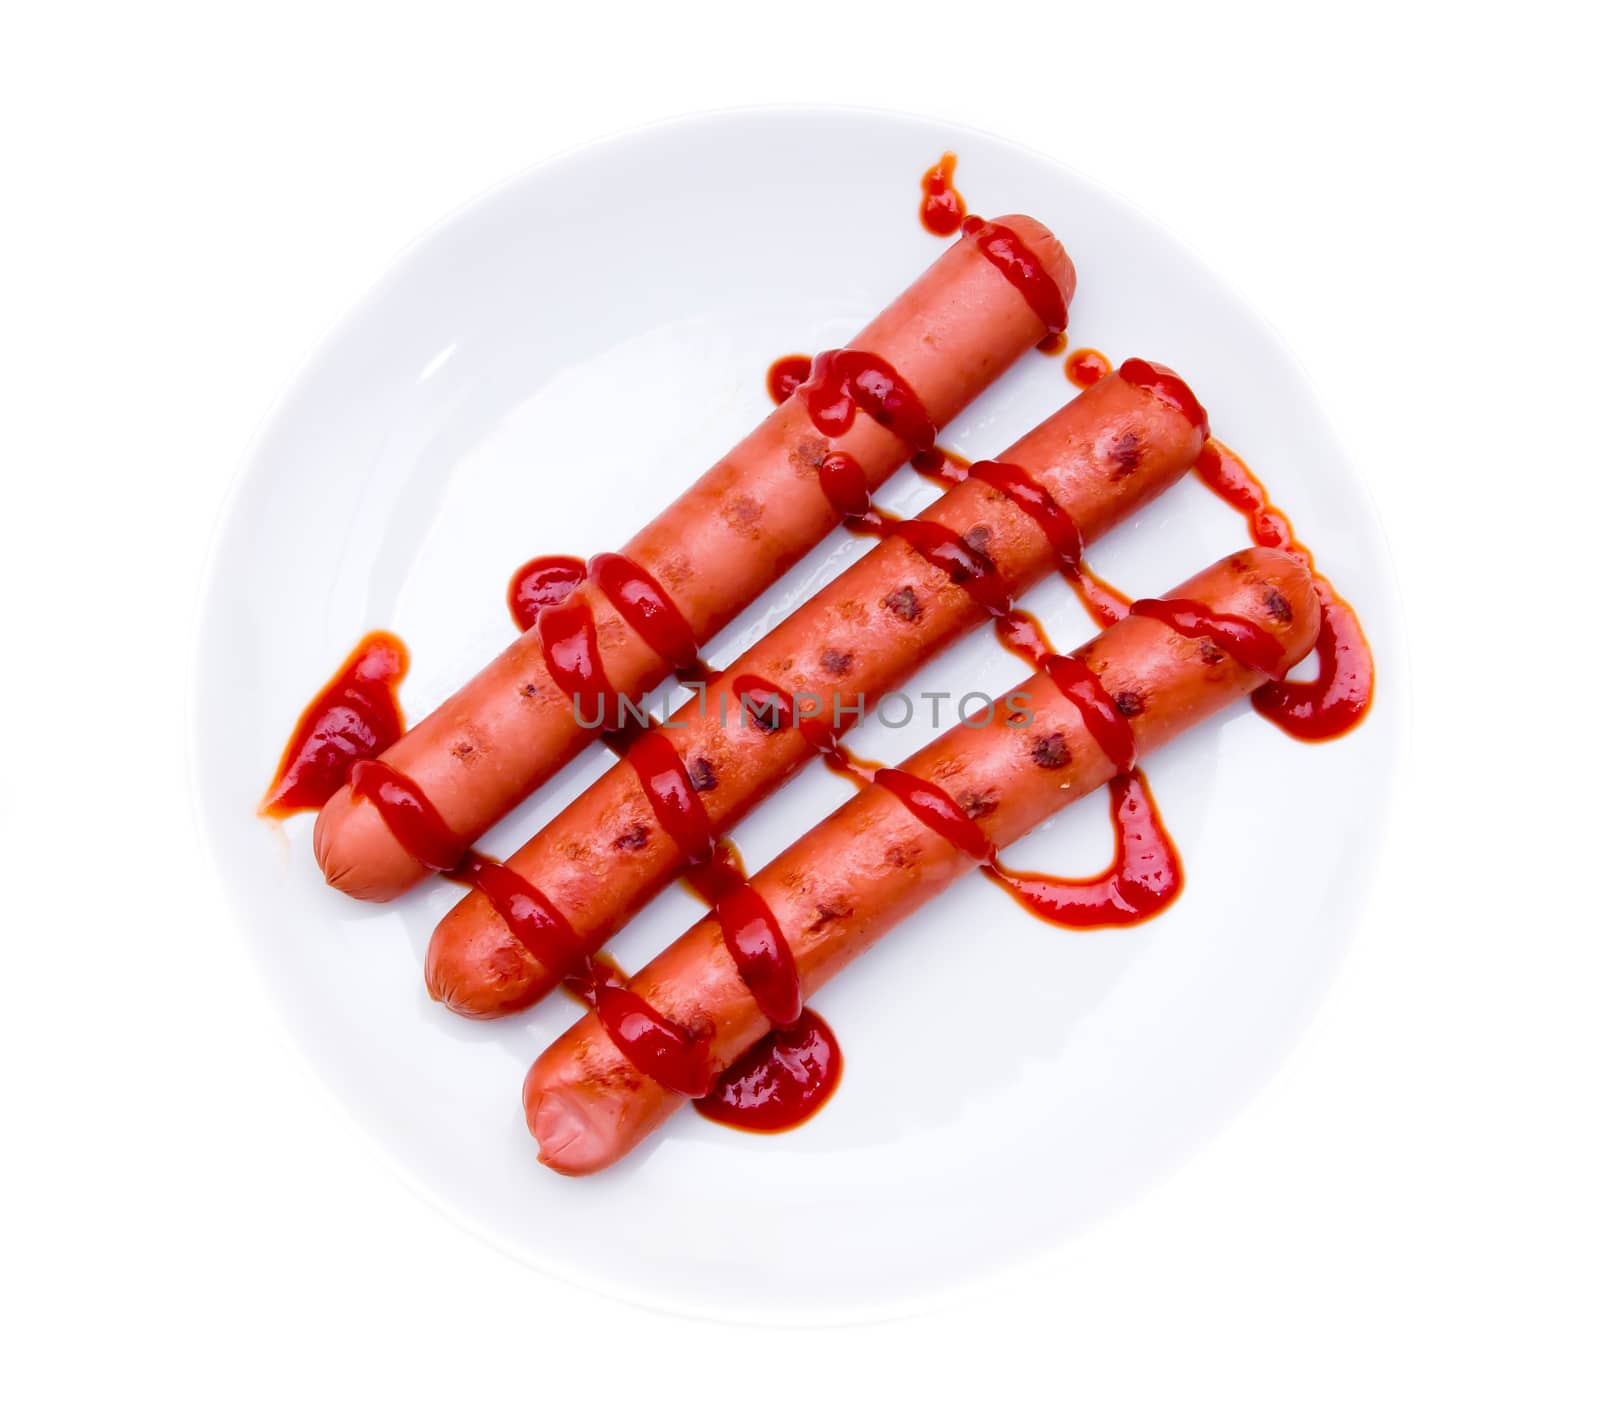 Sausages with tomato sauce on white background viewed from above